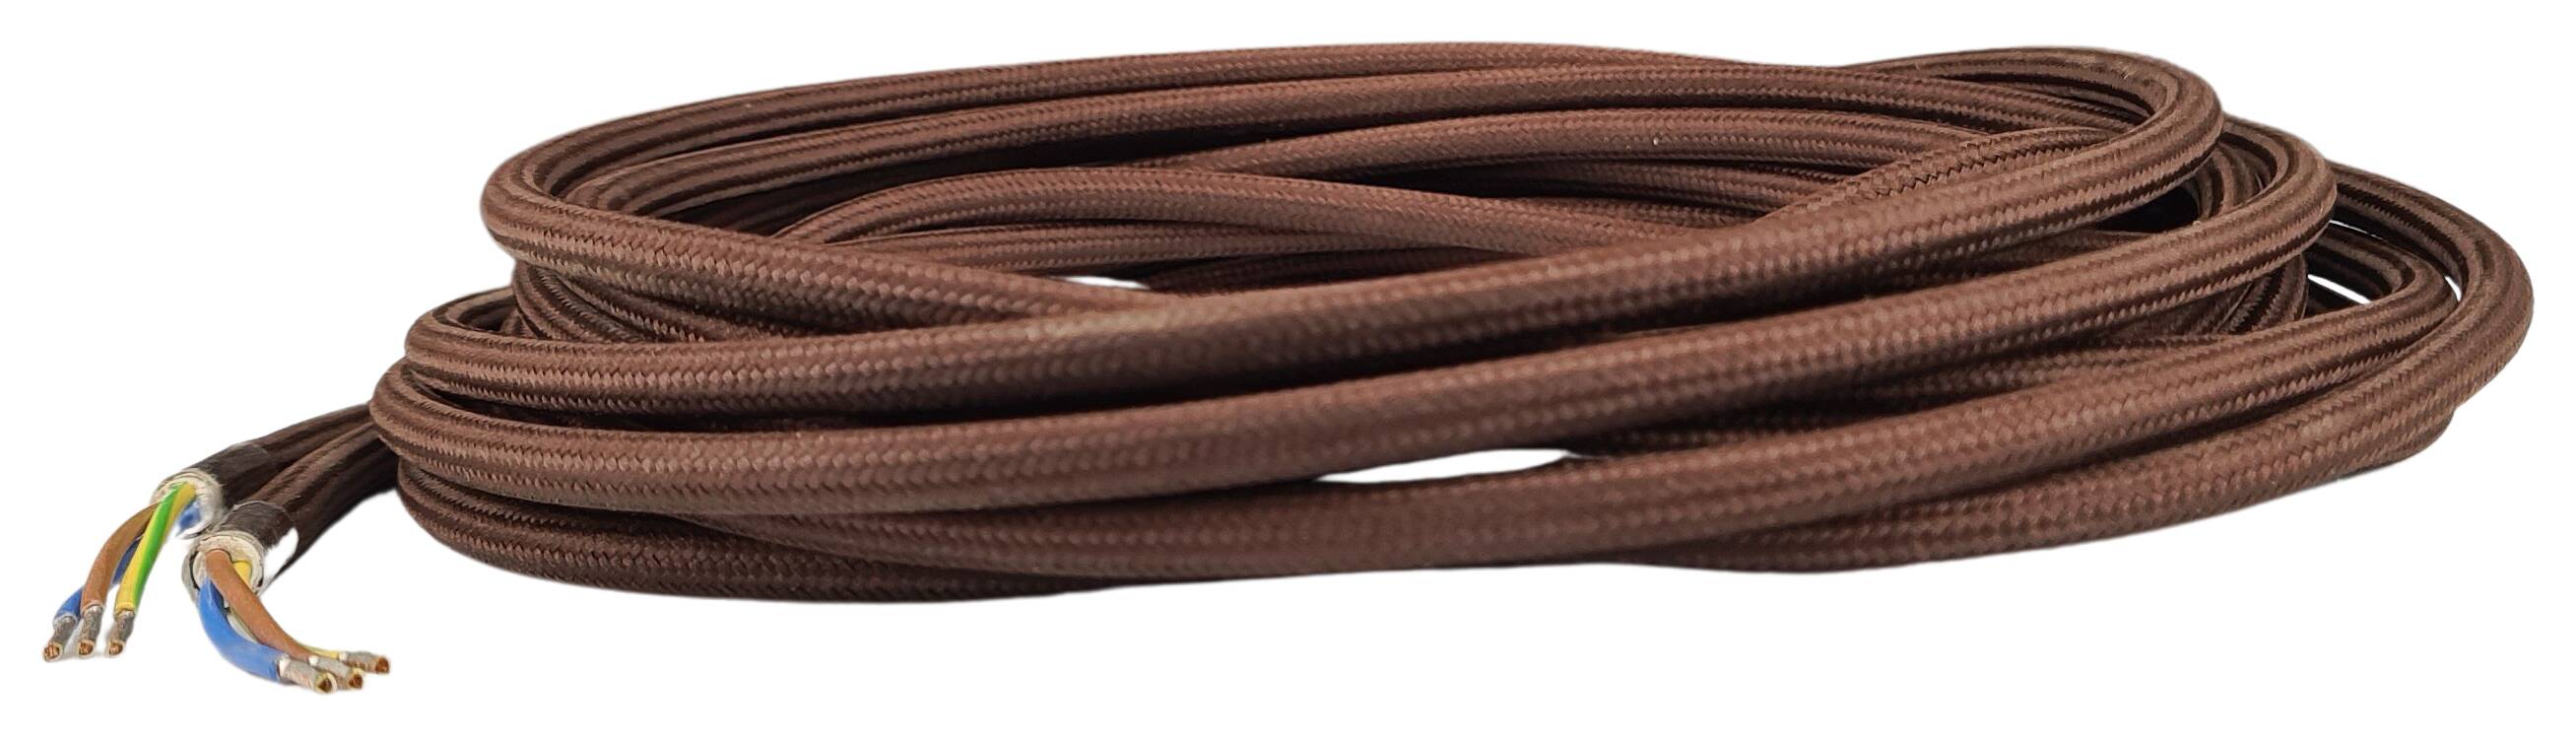 cable section 3G 0,75 H03VV-F textile braided 5000 mm 60/50 end sleeve color 285 brown